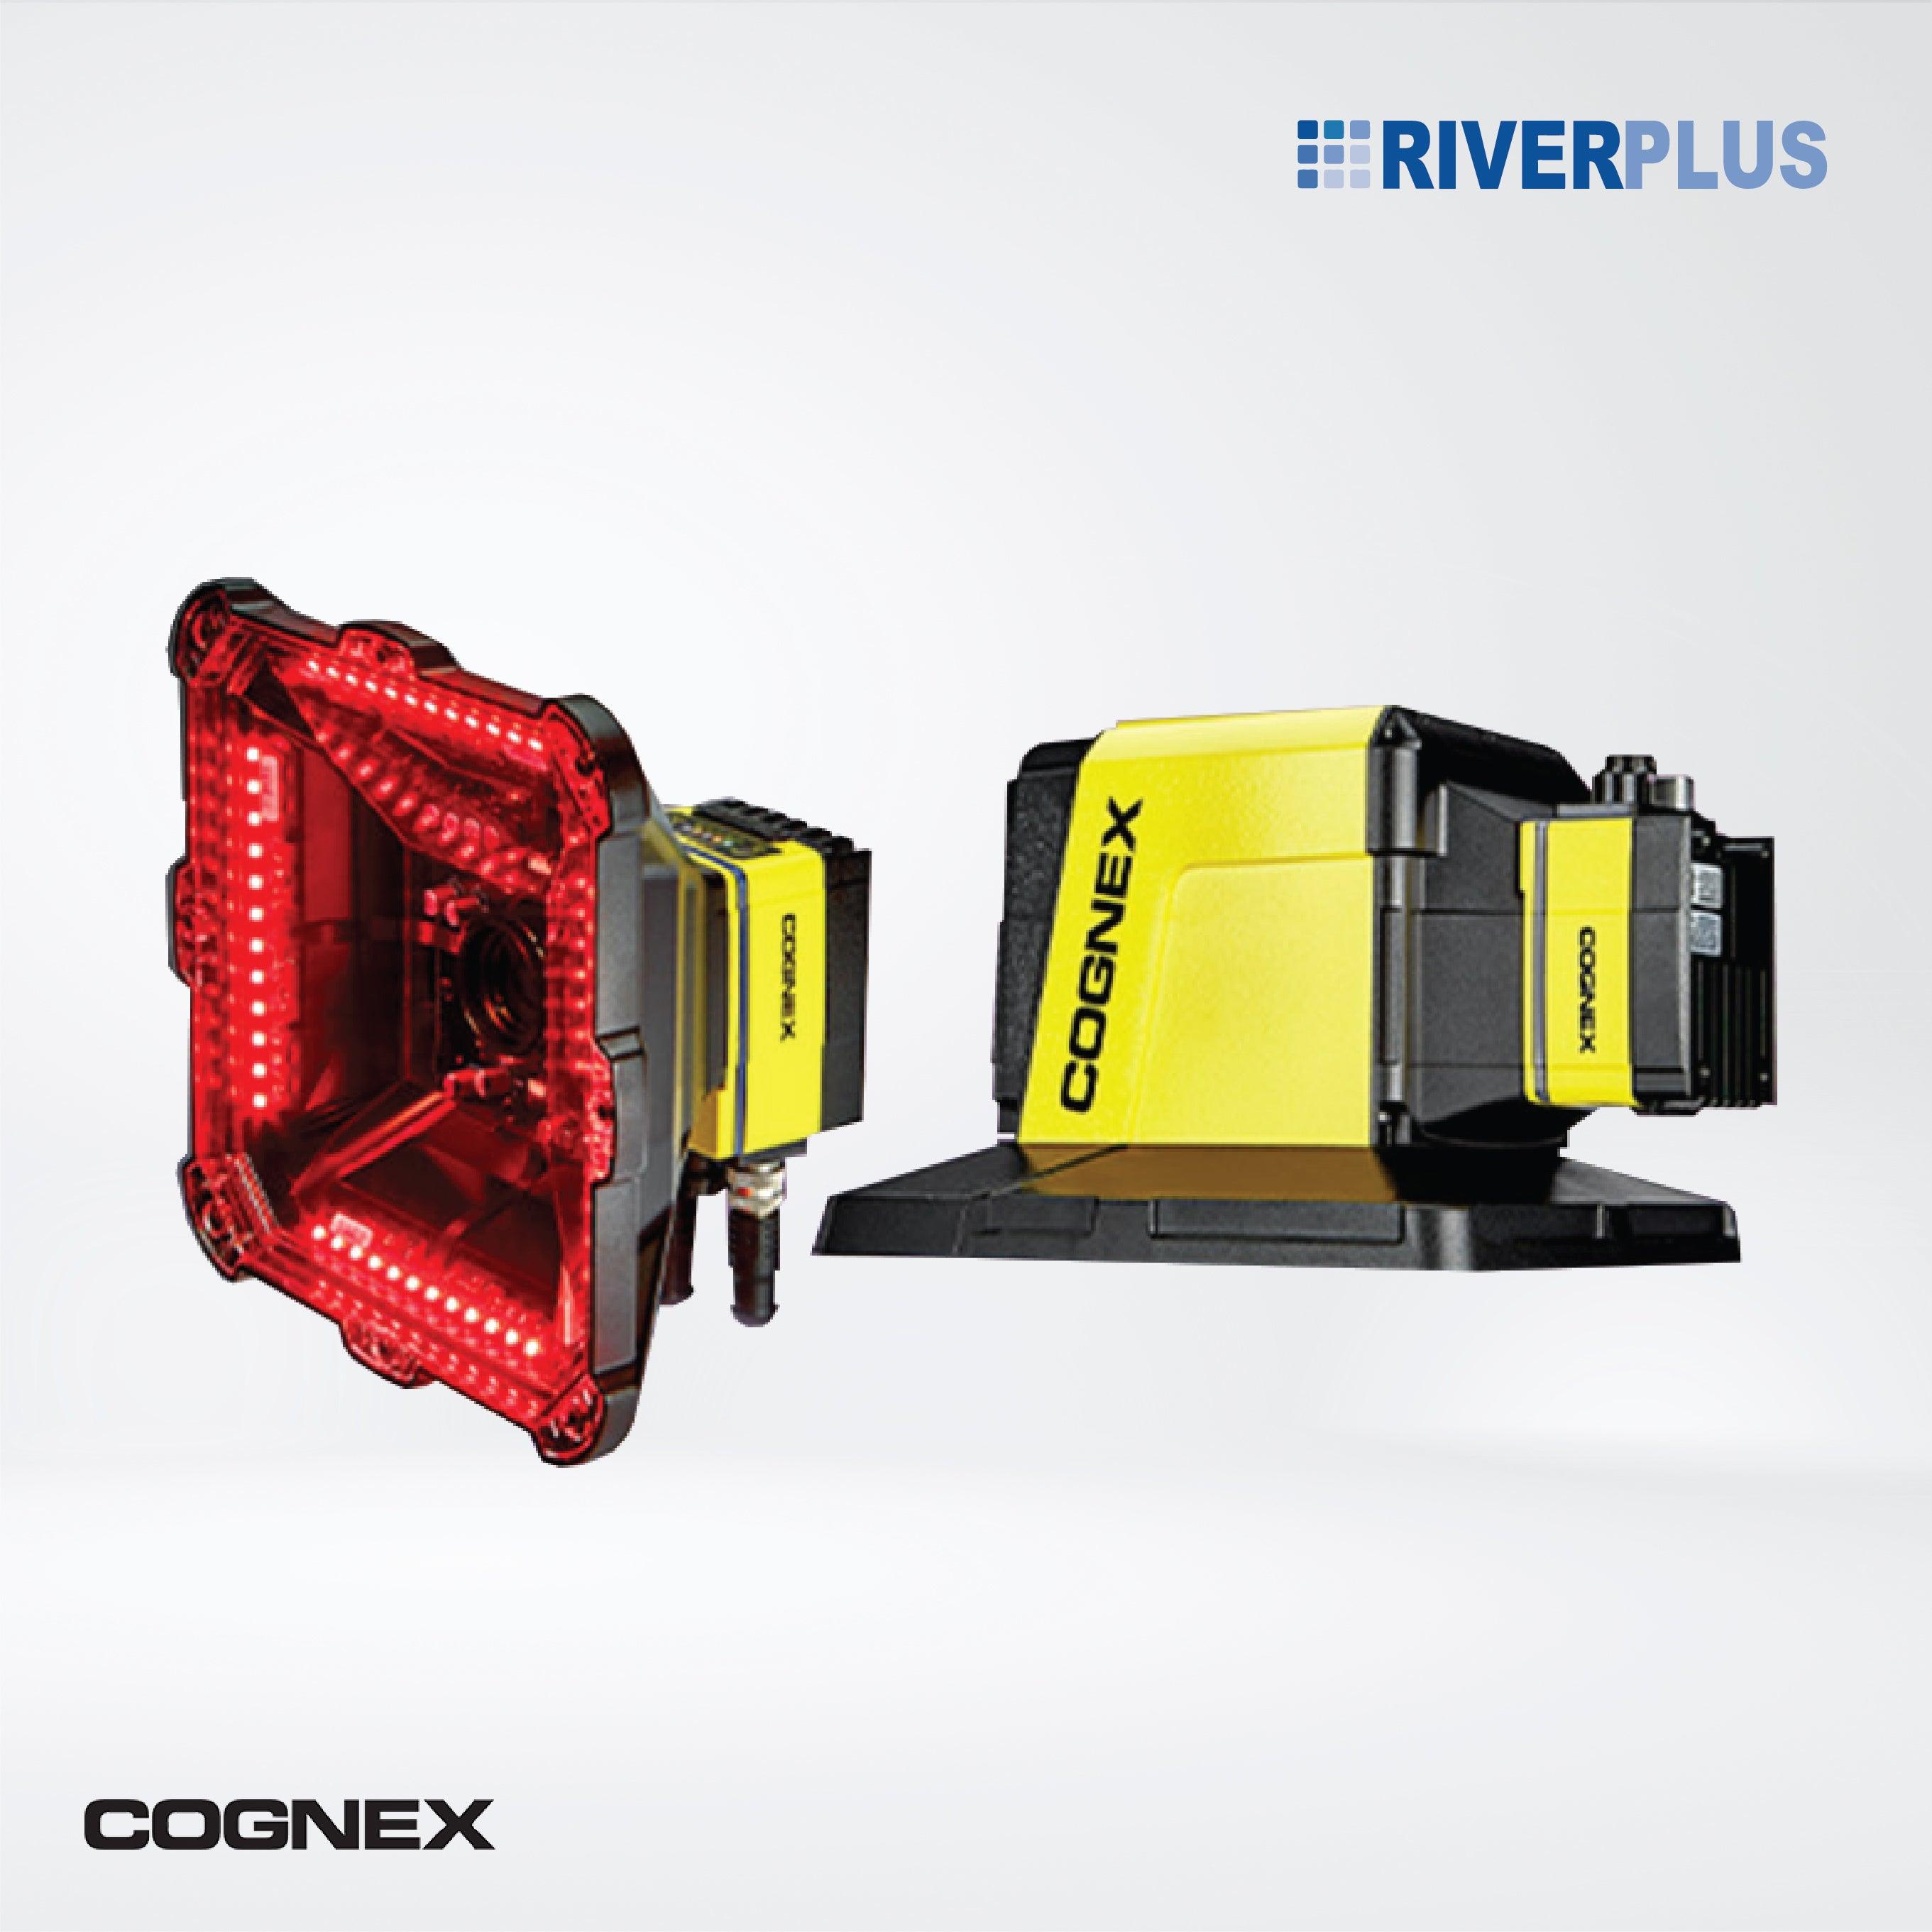 In-Sight 7905V Series Barcode Verifiers - Riverplus